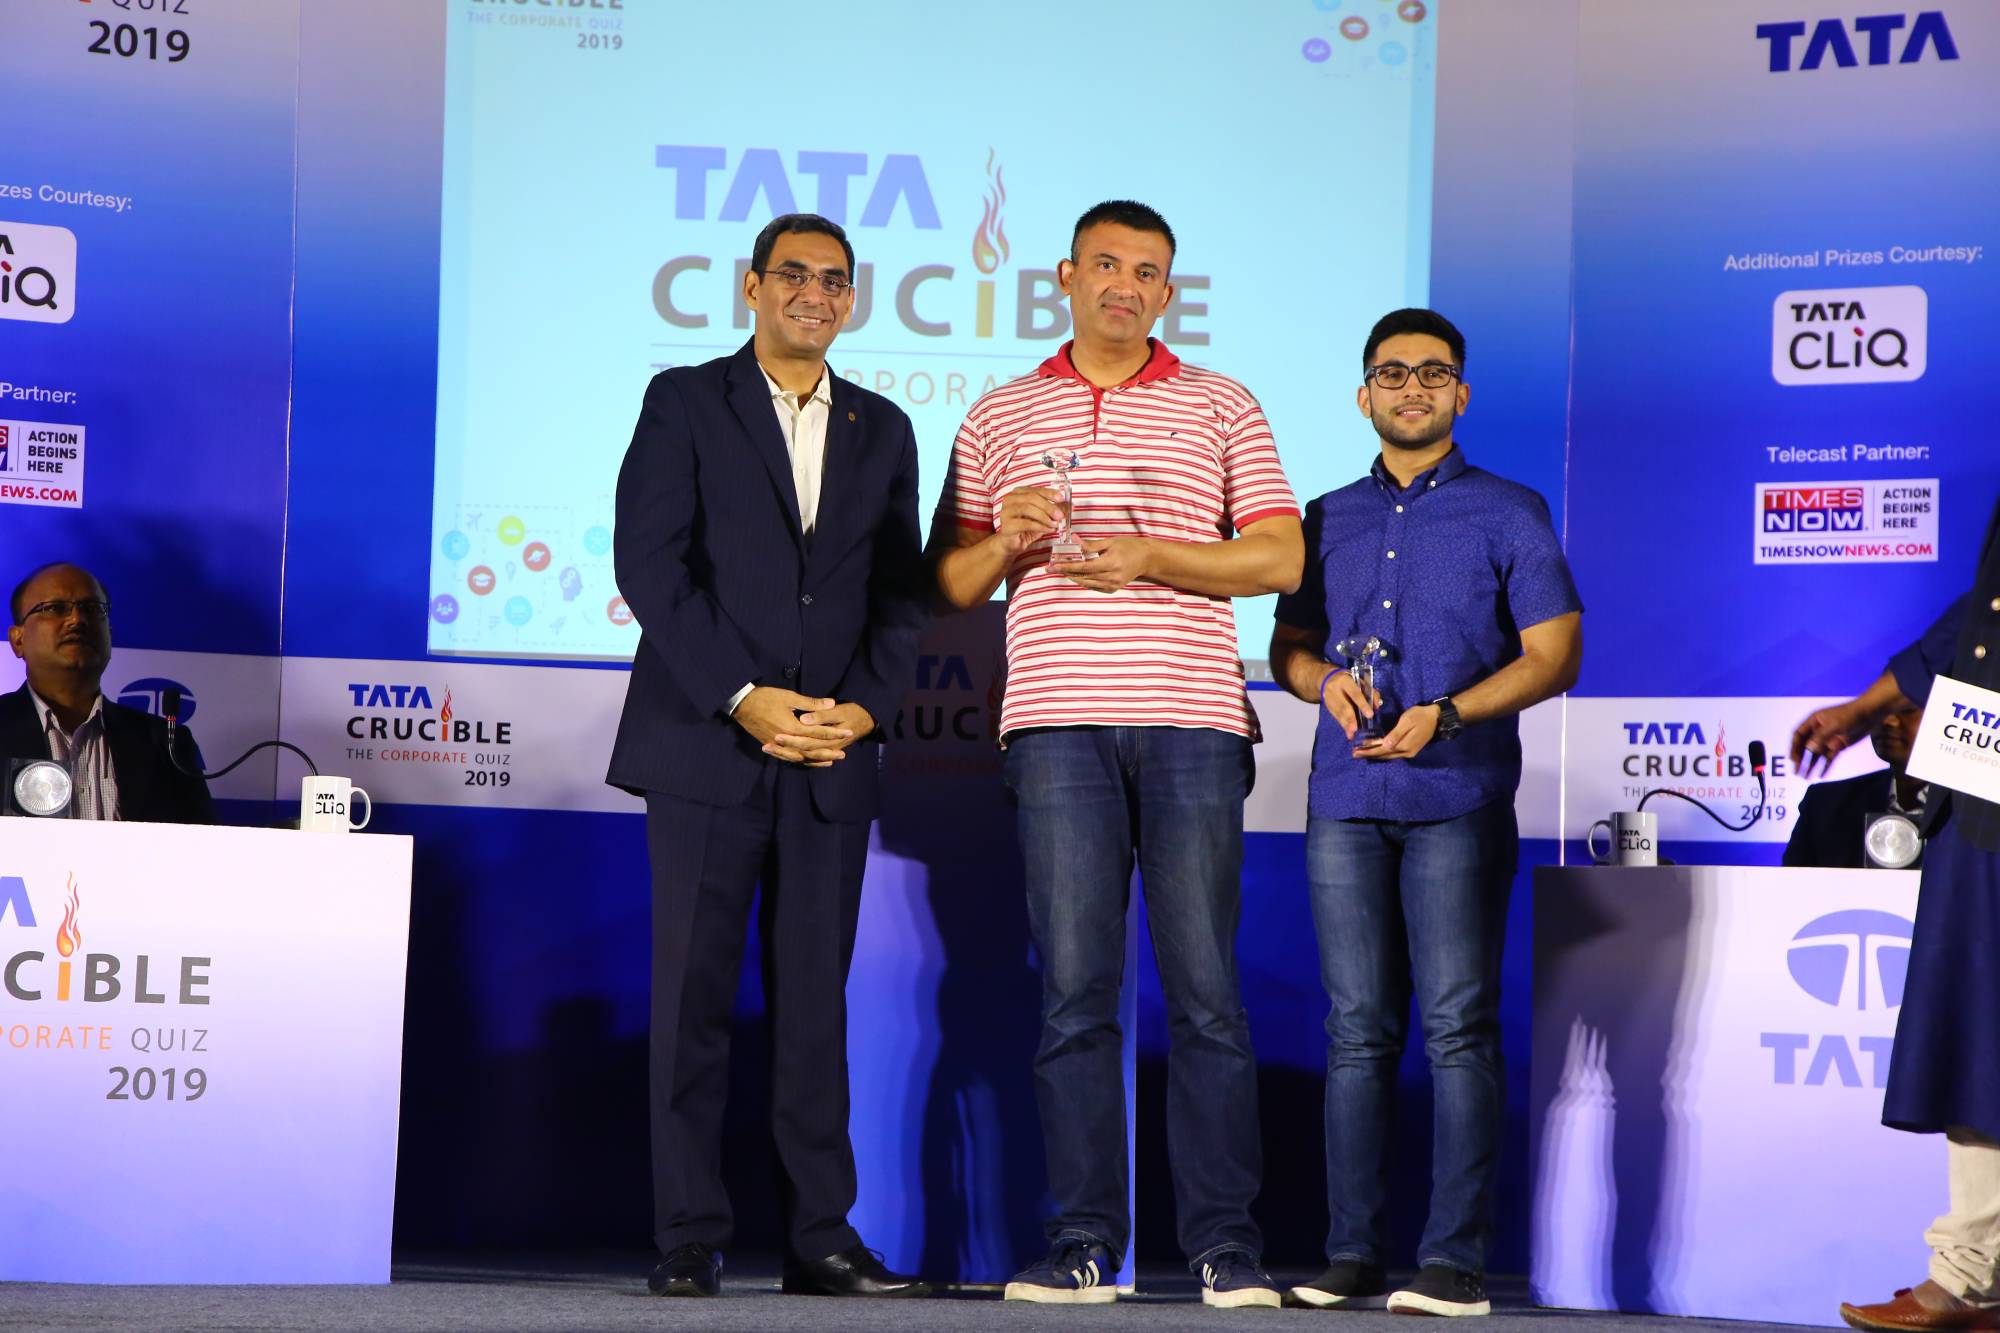 Tata Crucible Corporate Quiz Results For Runners - Barclays 